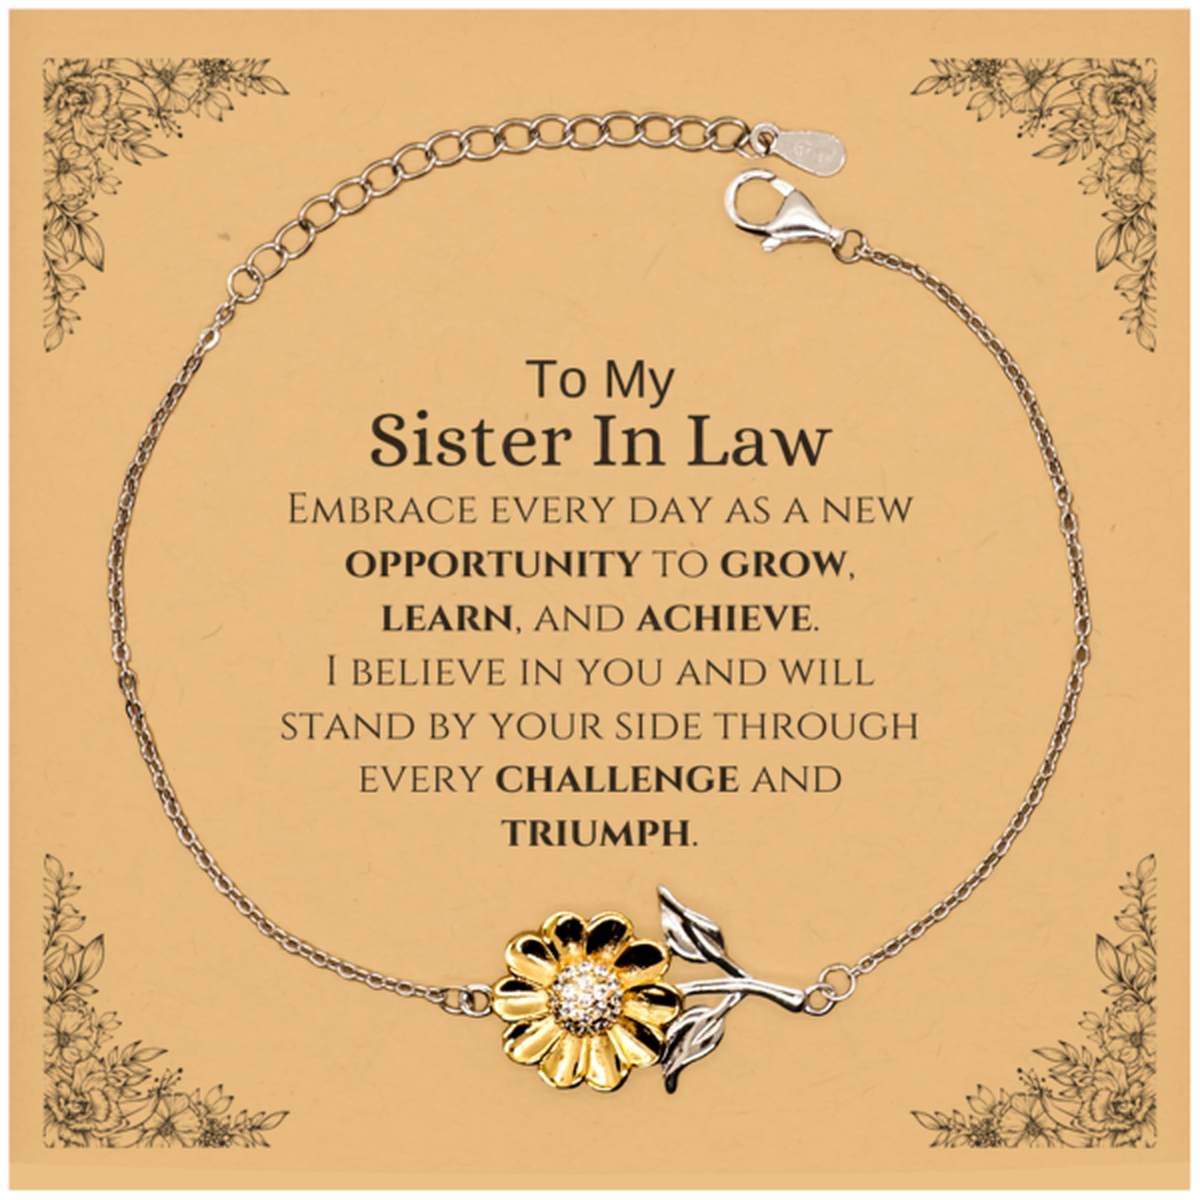 To My Sister In Law Gifts, I believe in you and will stand by your side, Inspirational Sunflower Bracelet For Sister In Law, Birthday Christmas Motivational Sister In Law Gifts